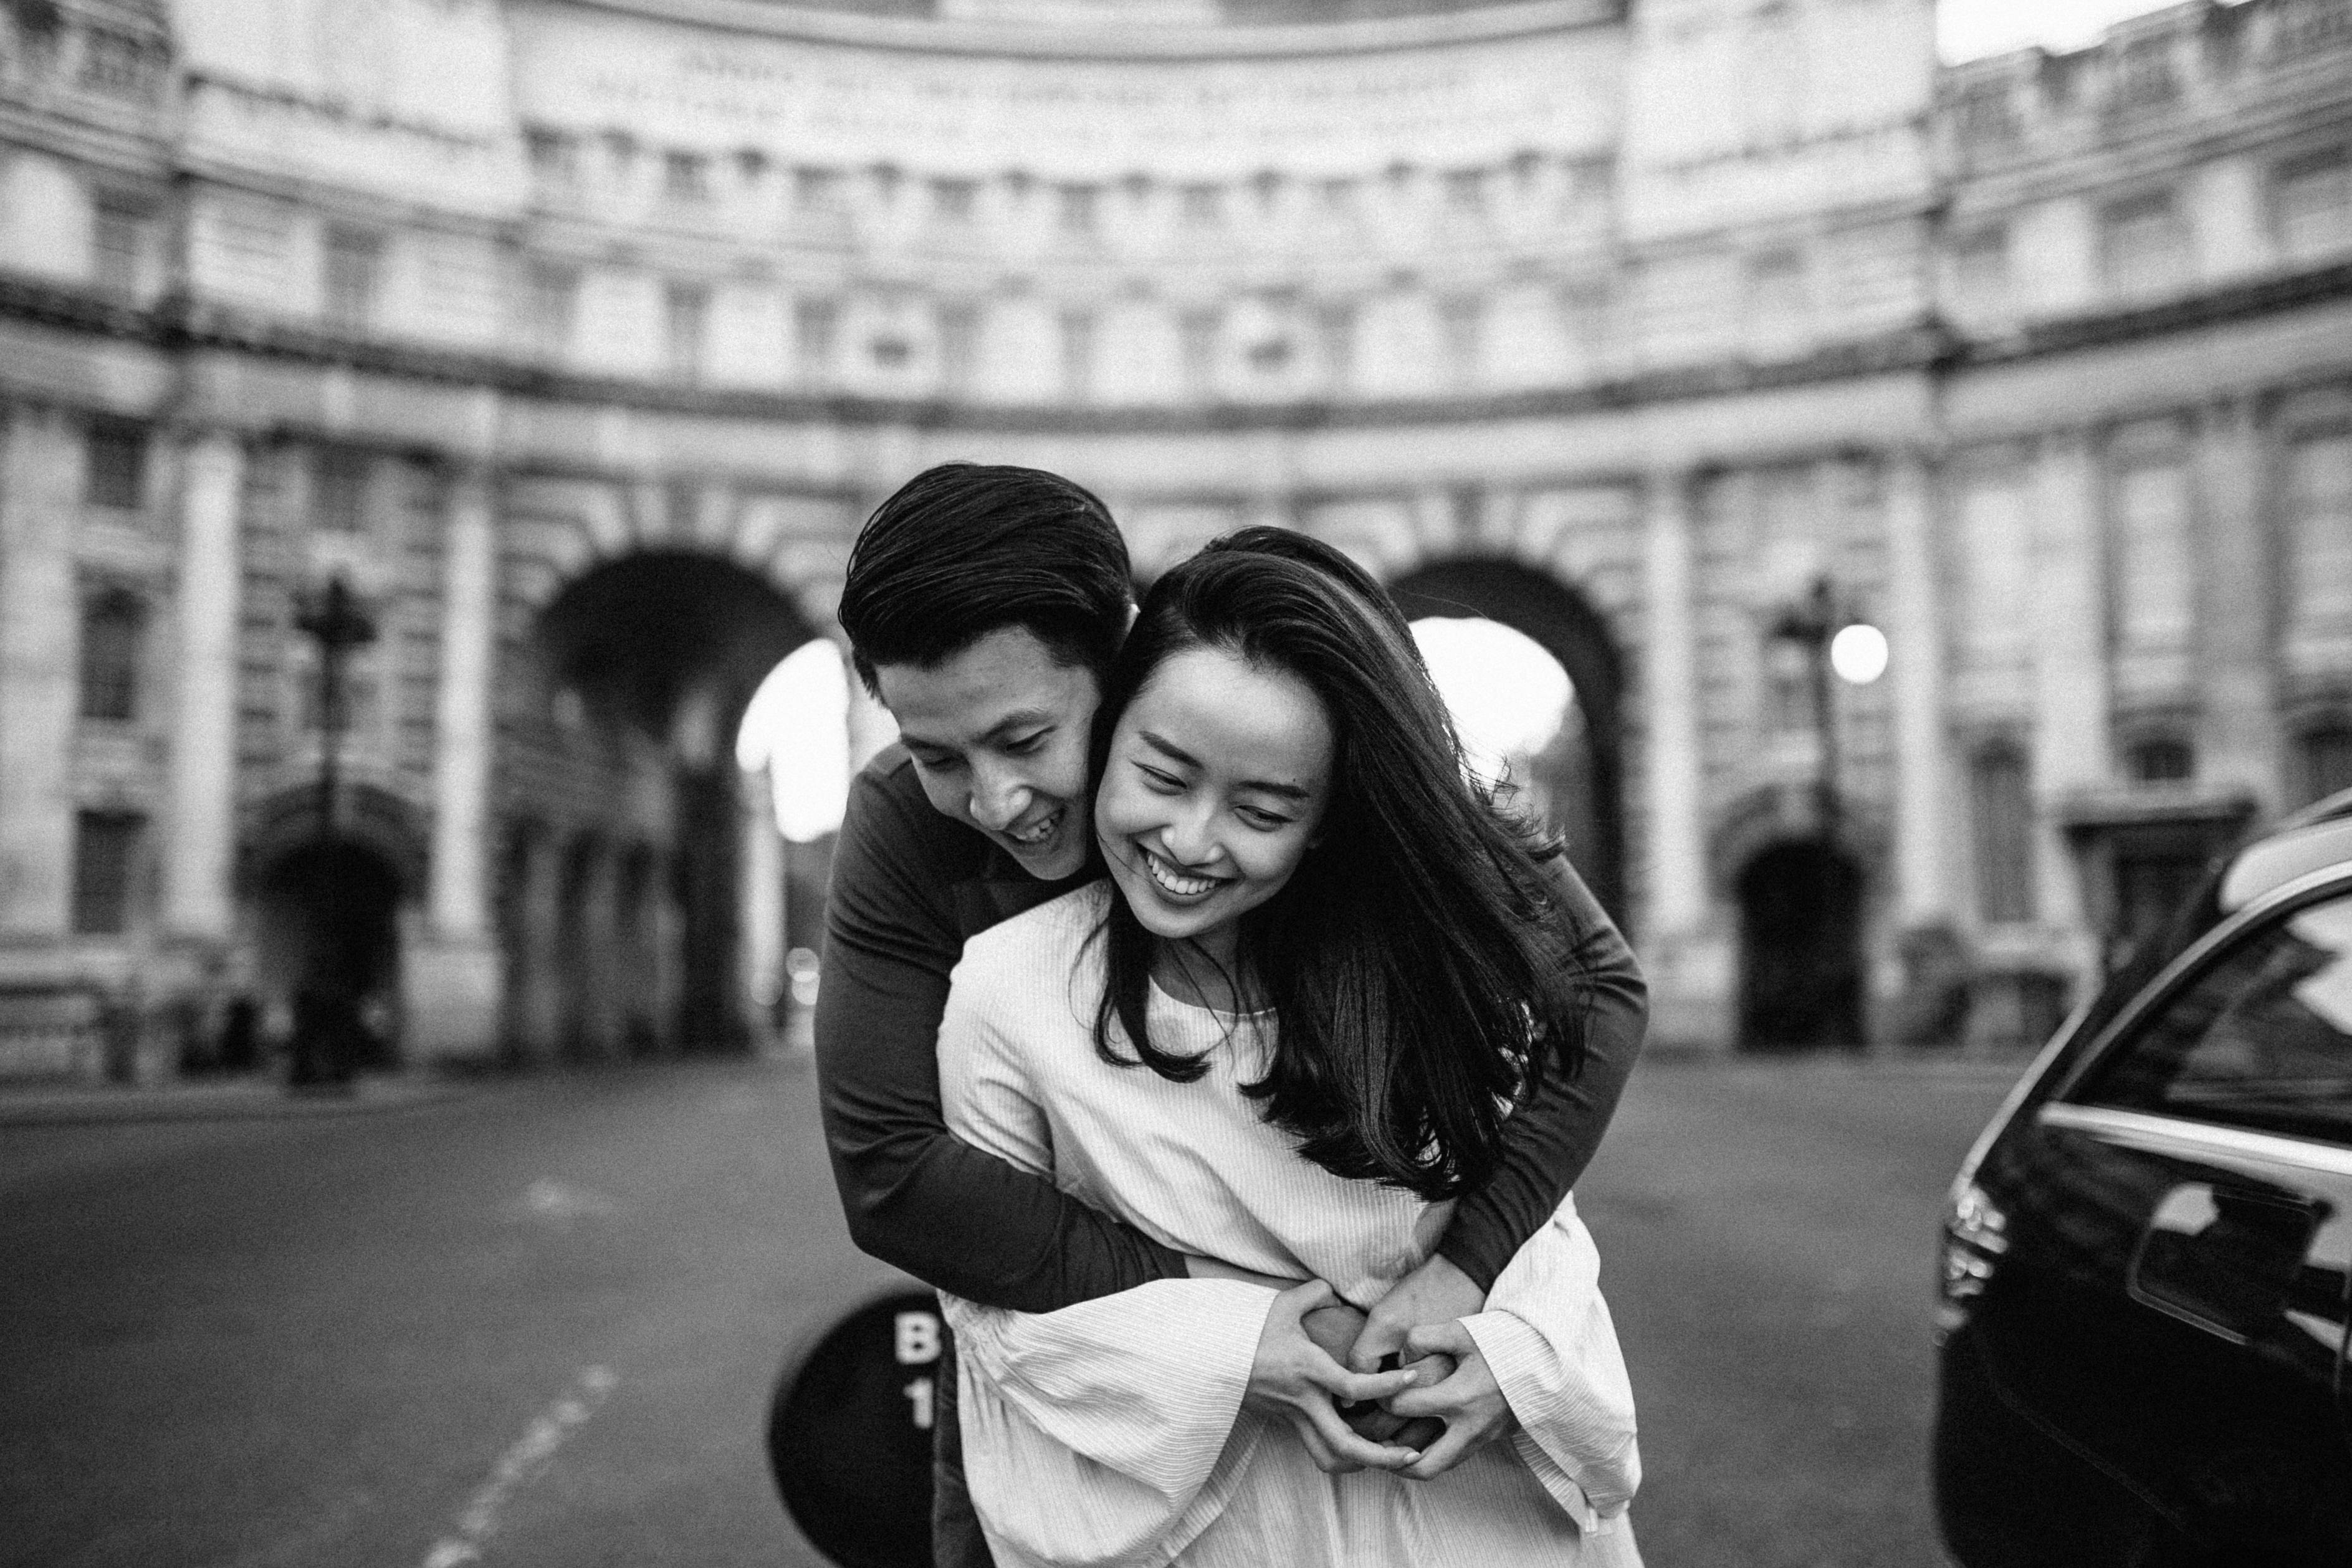 FUN ENGAGEMENT SHOOT IDEAS IN LONDON WESMINSTER SOHO AND SOUTH BANK BIG BEN